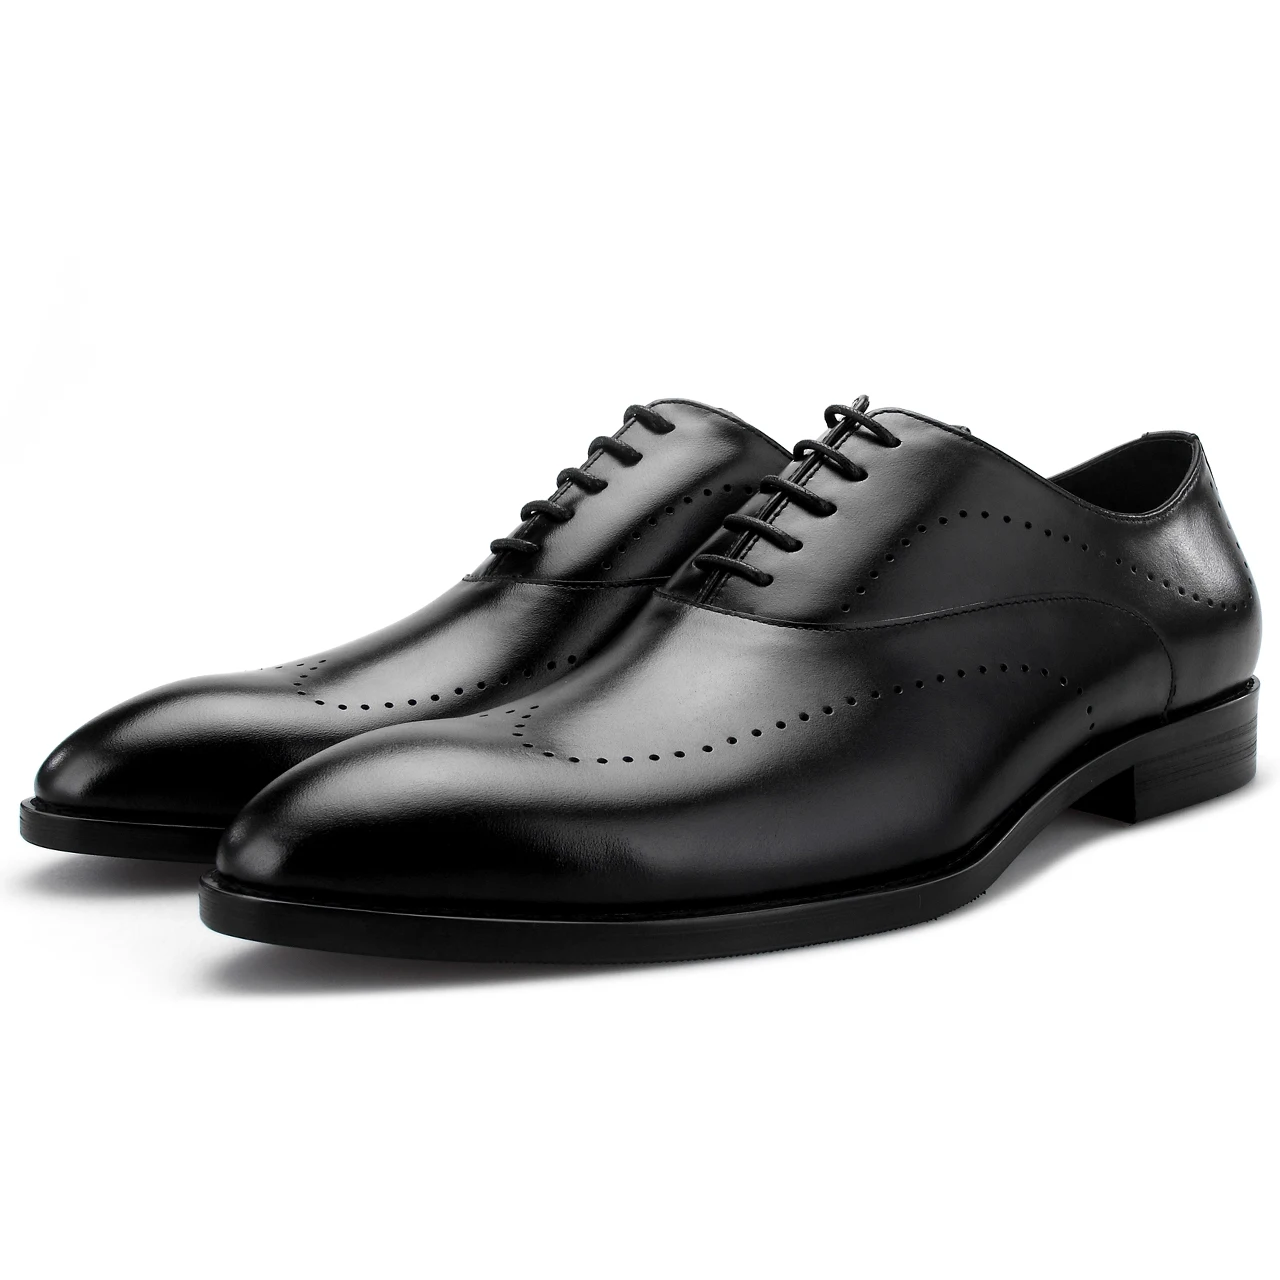 Details about   38-44 Mens Dress Formal Business Shoes Oxfords Pointy Toe Shiny Lace up Casual L 